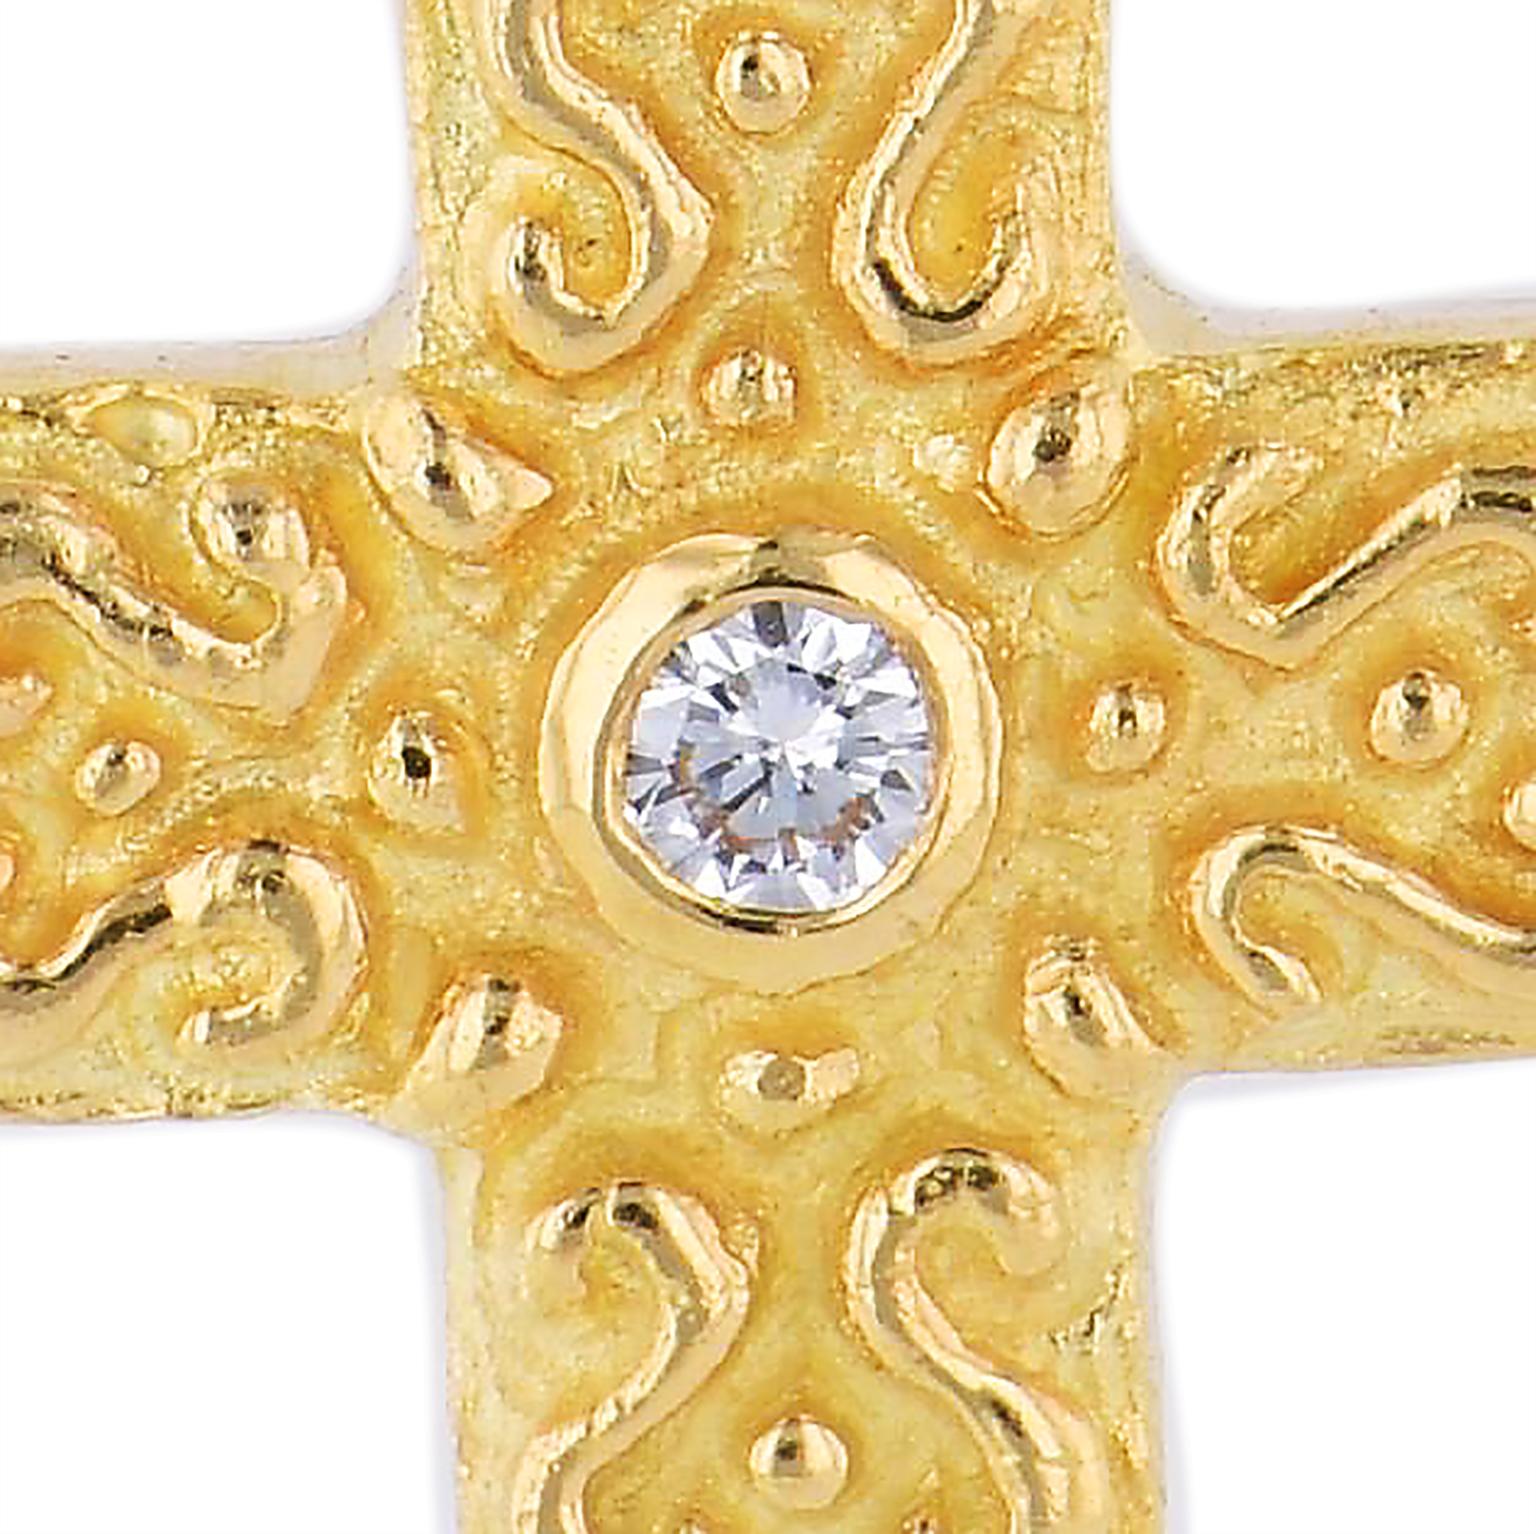 Enjoy this previously loved Katy Briscoe 18 karat yellow gold cross with removable hinge on bale. This pendant features a bezel set diamond at center with a total weight of 0.17 carat (G/SI1) strung on a 16 inch link chain necklace.